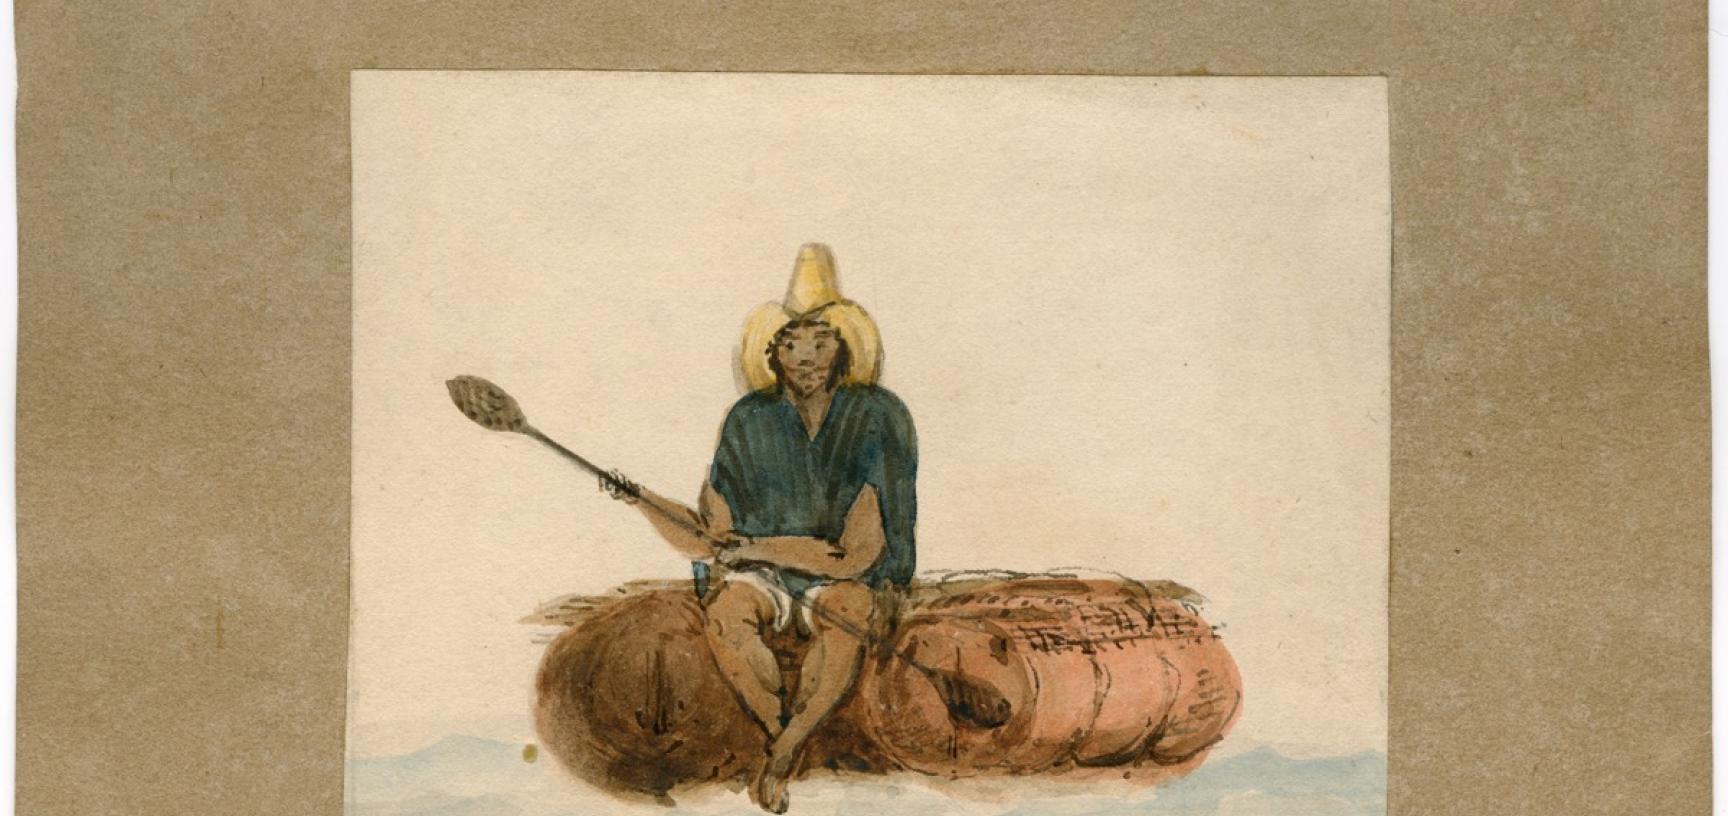 A fisherman from Chile on a raft made of inflated bullock hides. The Seringapatam spent the early years of 1830 and much of 1831 and 1832 sailing up and down the coast of Chile. 